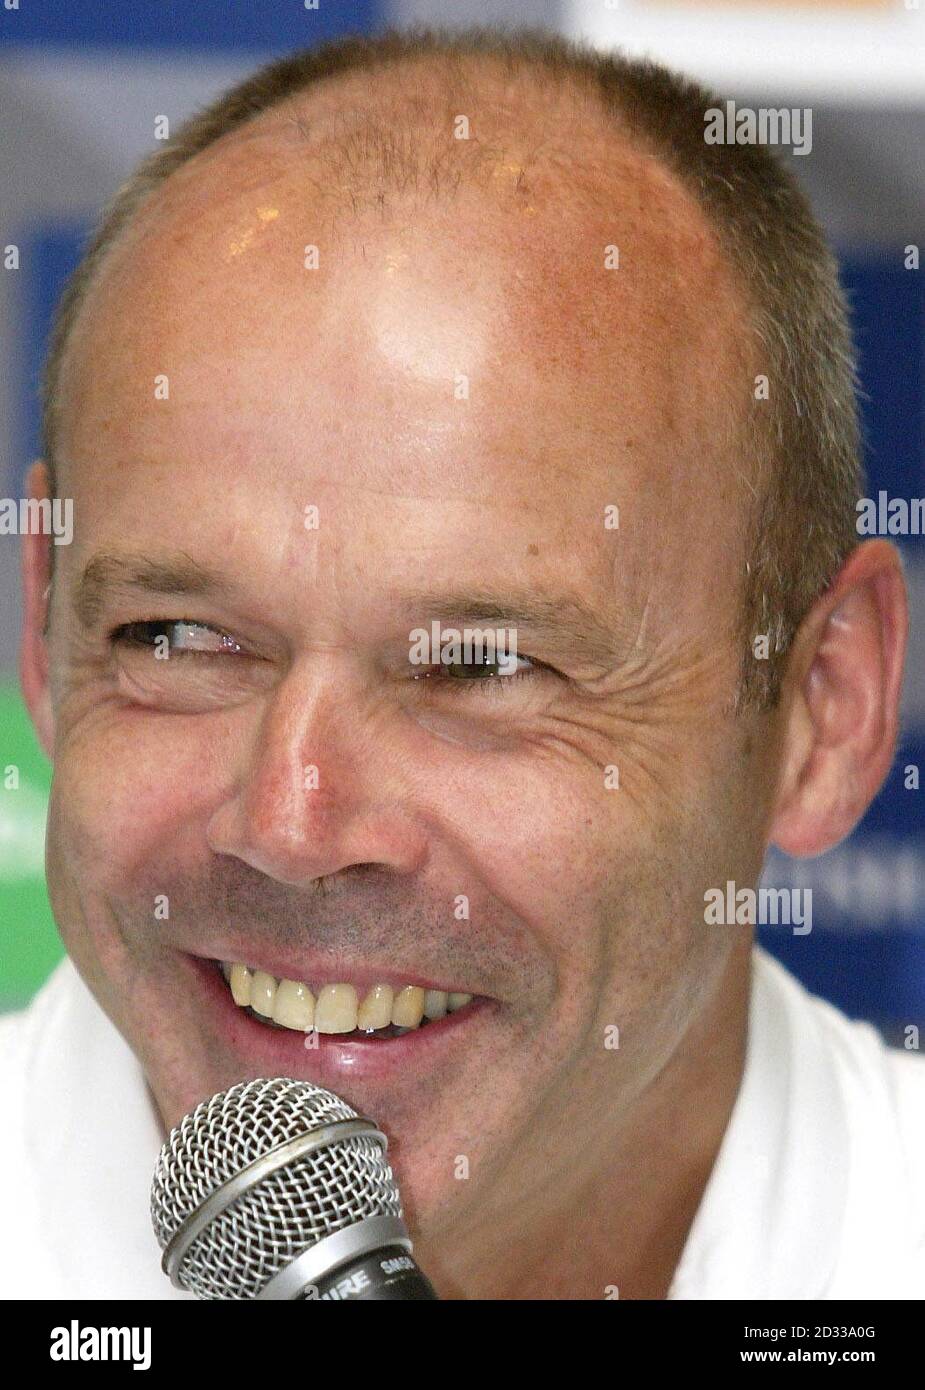 English head coach Clive Woodward at a press conference at the team hotel in Manley in Sydney, ahead of their Rugby World cup final against Australia on Saturday. England's record of 22 wins from their last 23 Tests - including home and away victories over Australia - makes them marginal favourites for the greatest British sporting triumph since England were crowned world football champions 37 years ago. Stock Photo